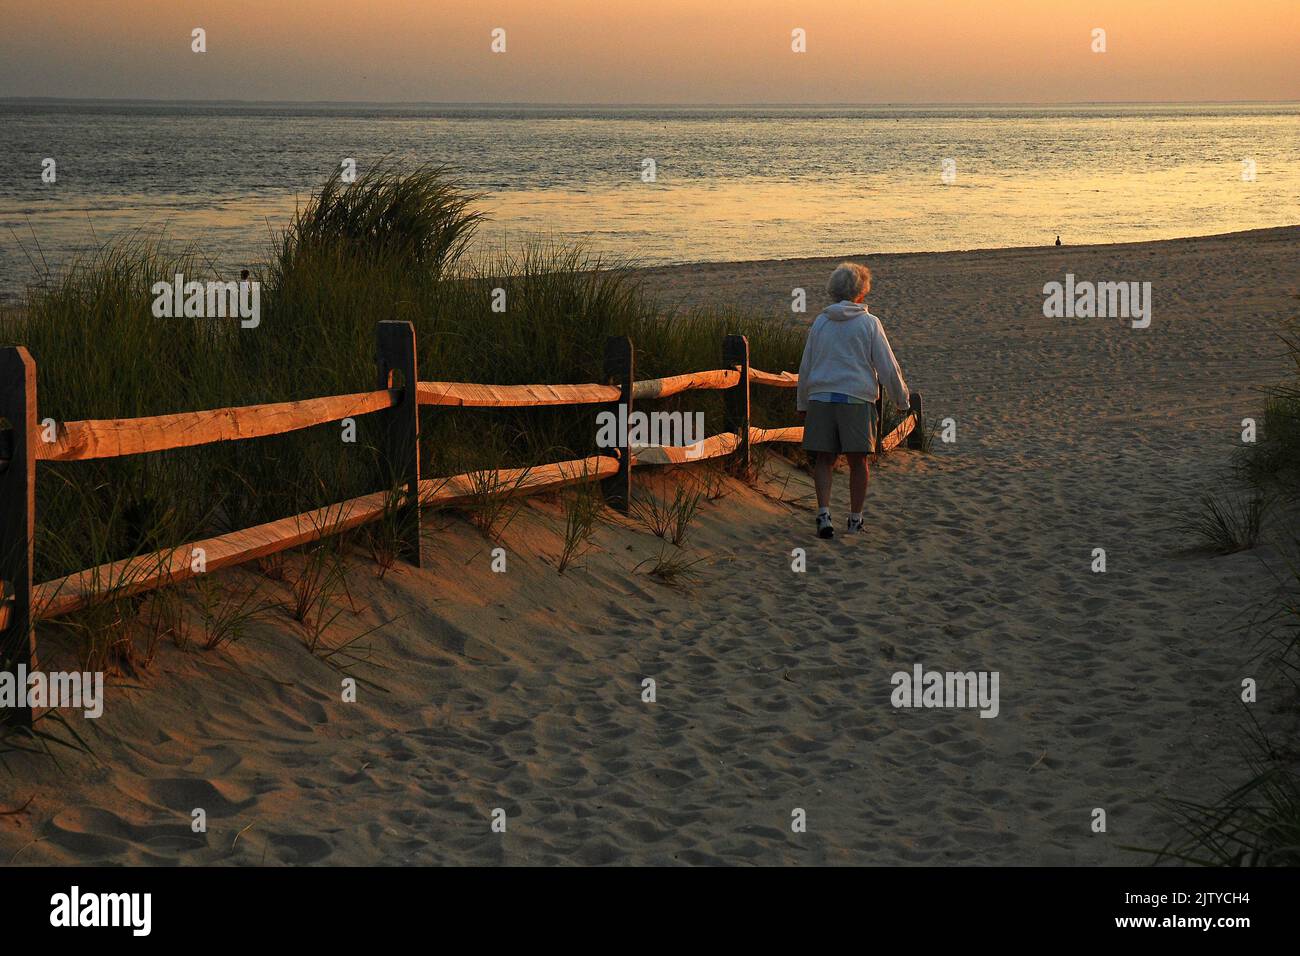 A lone Elderly woman seeks solitude and quiet contemplation as she follows a path to the sea near sunset in Cape May New Jersey Stock Photo